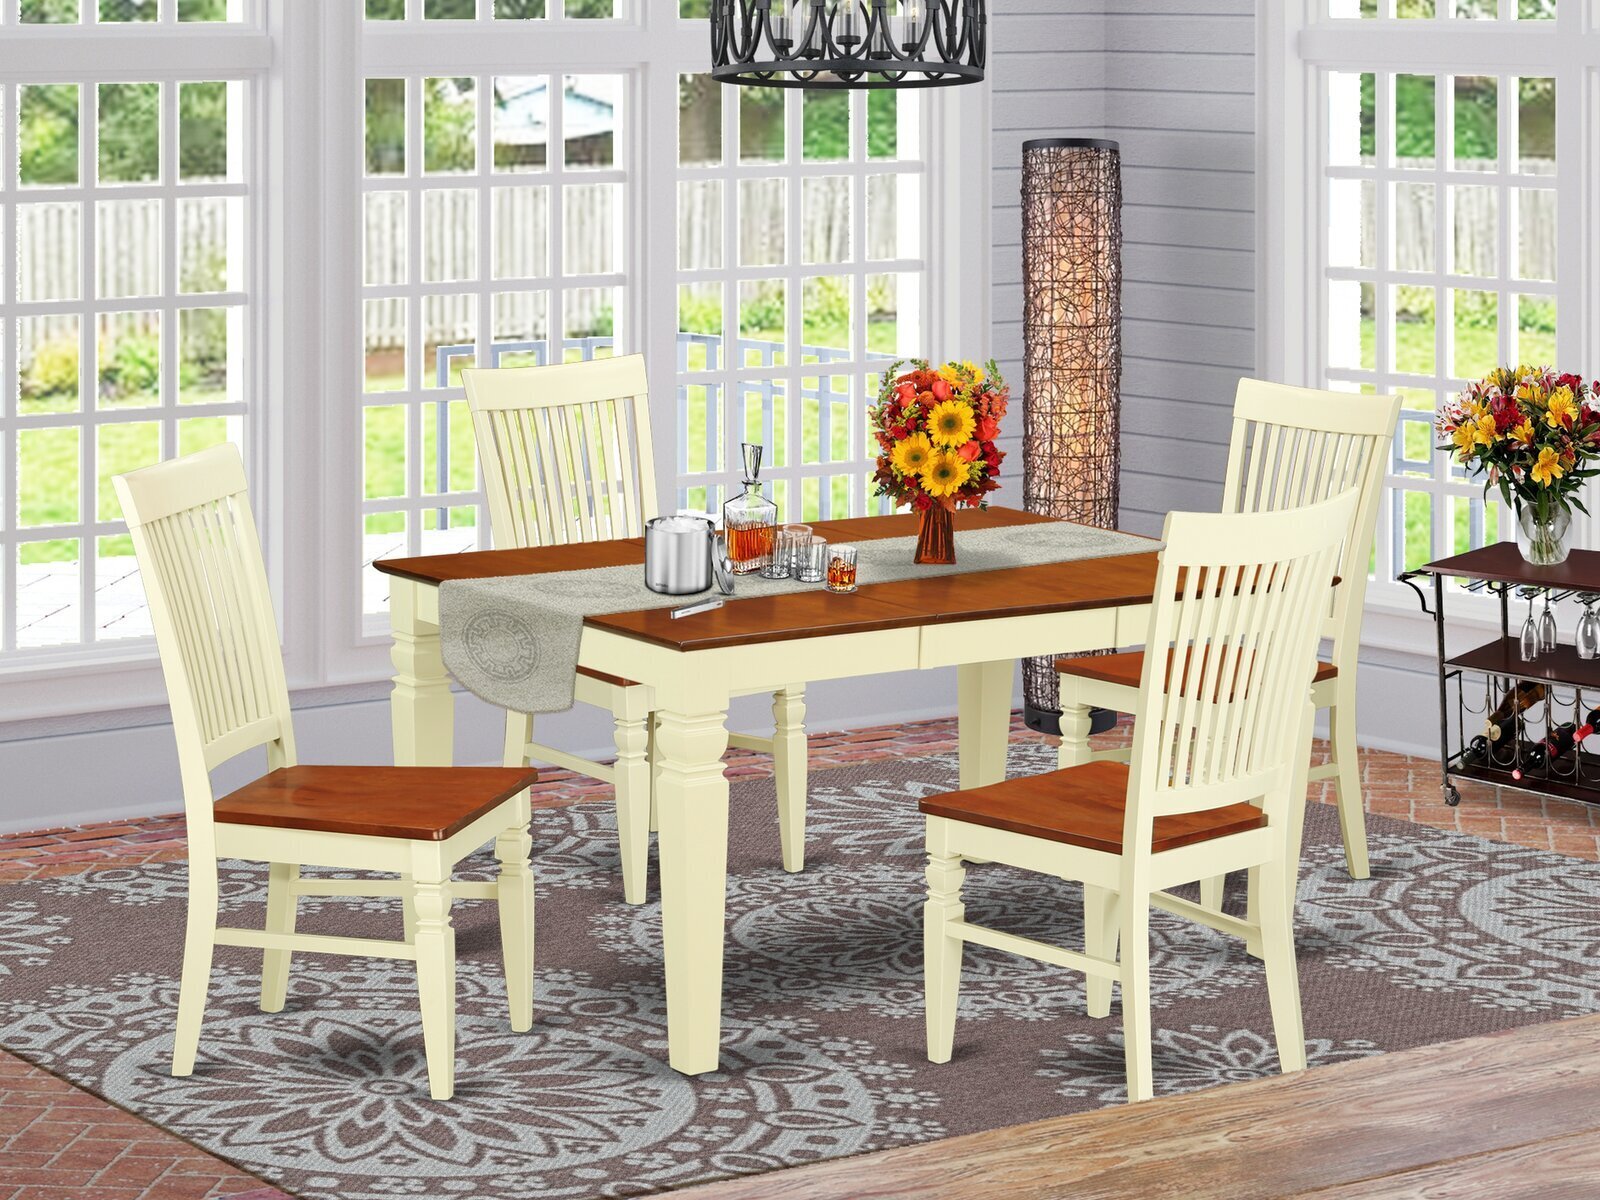 Extendable Solid Cherry Wood Dining Table and Chairs